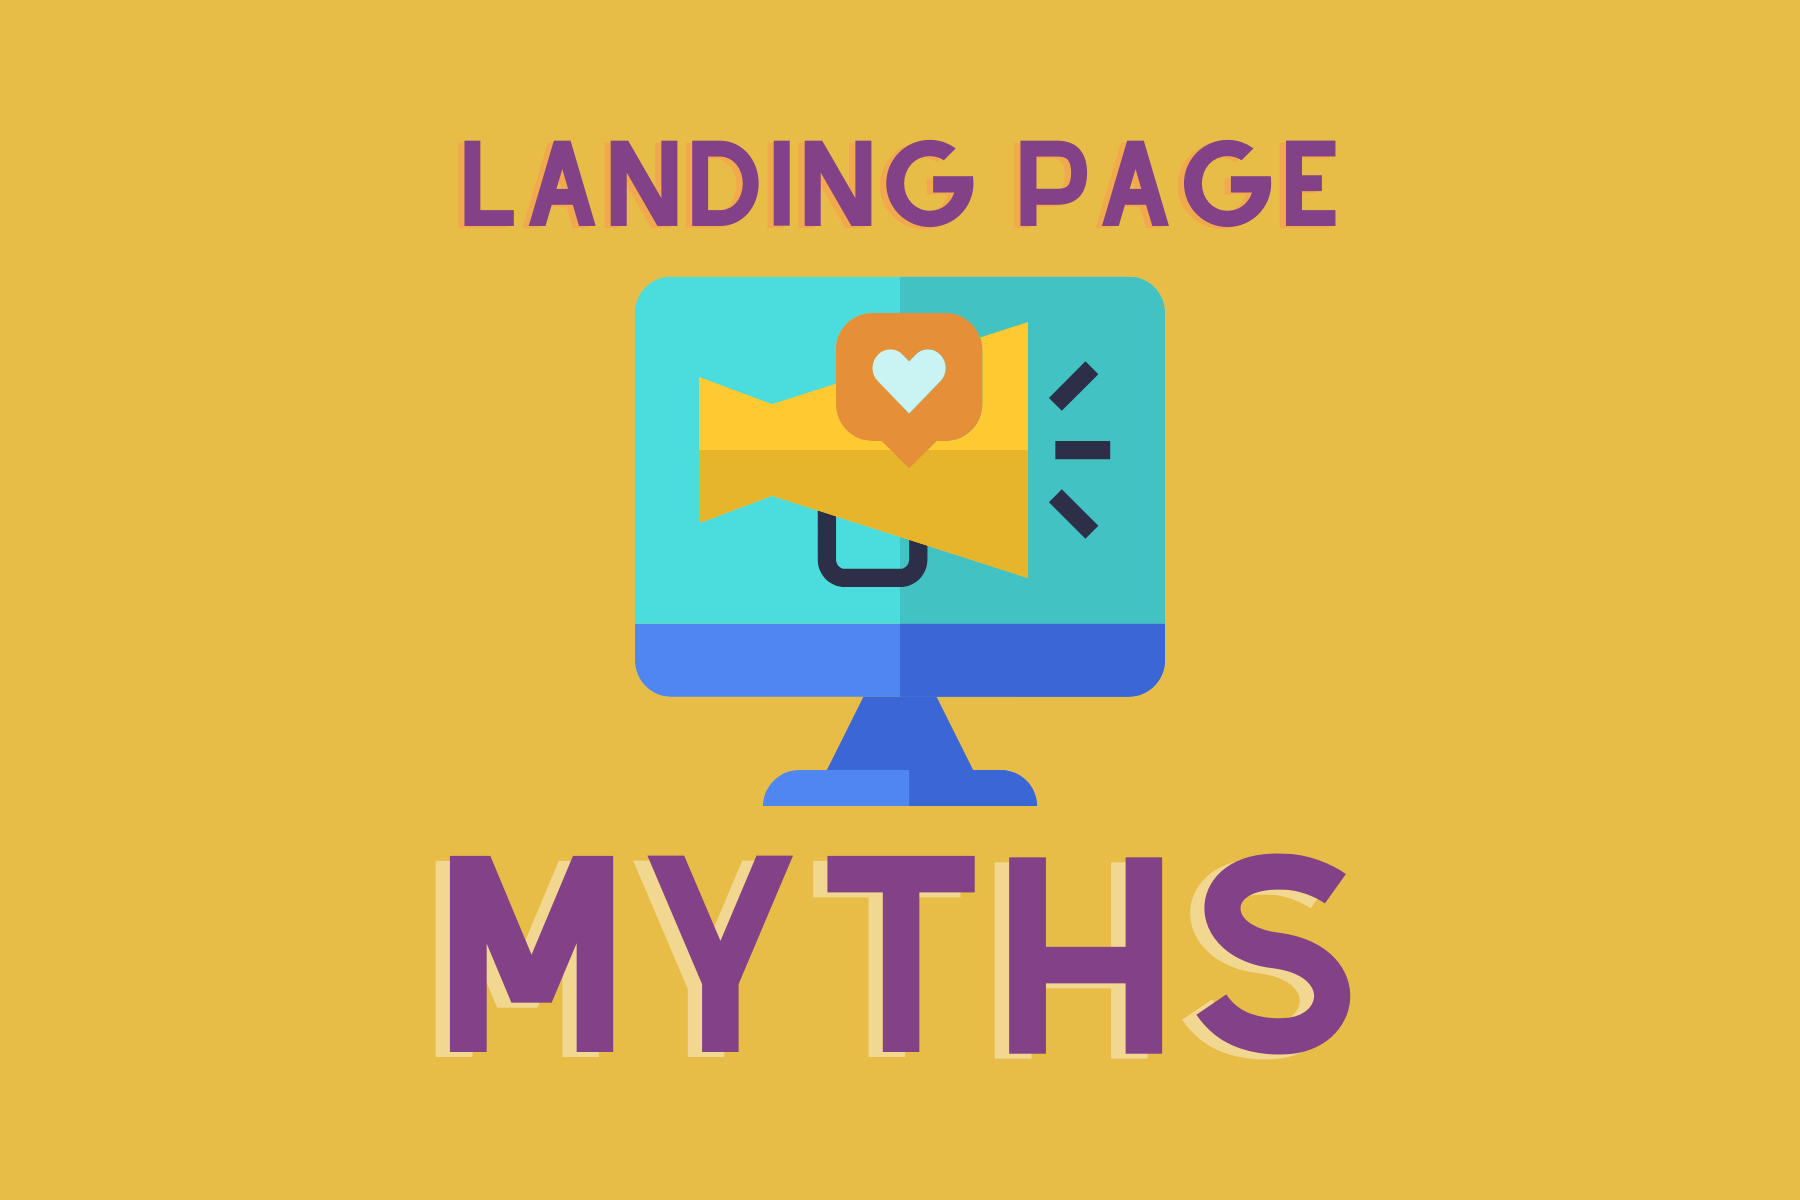 landing page myths in education